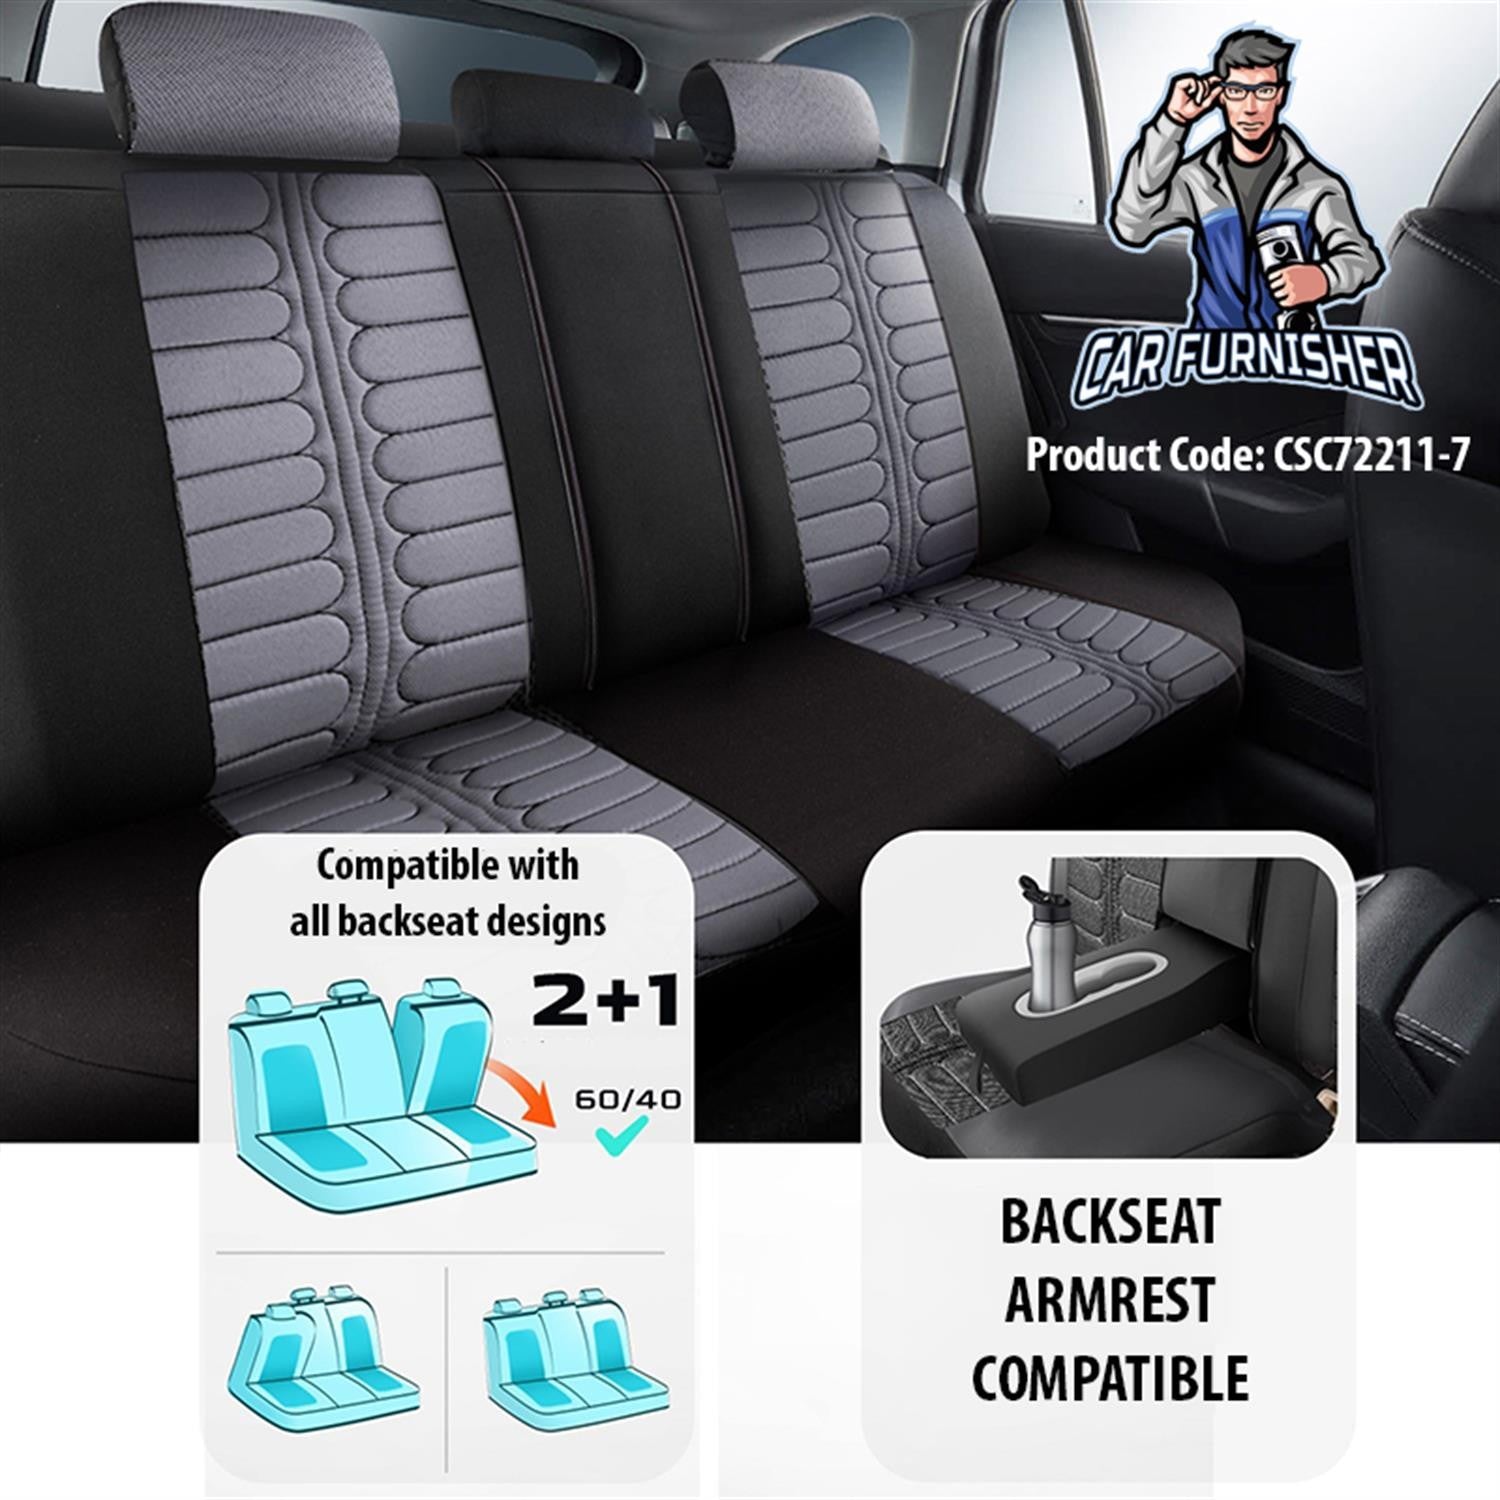 Mercedes 190 Seat Covers London Design Silver 5 Seats + Headrests (Full Set) Leather & Jacquard Fabric